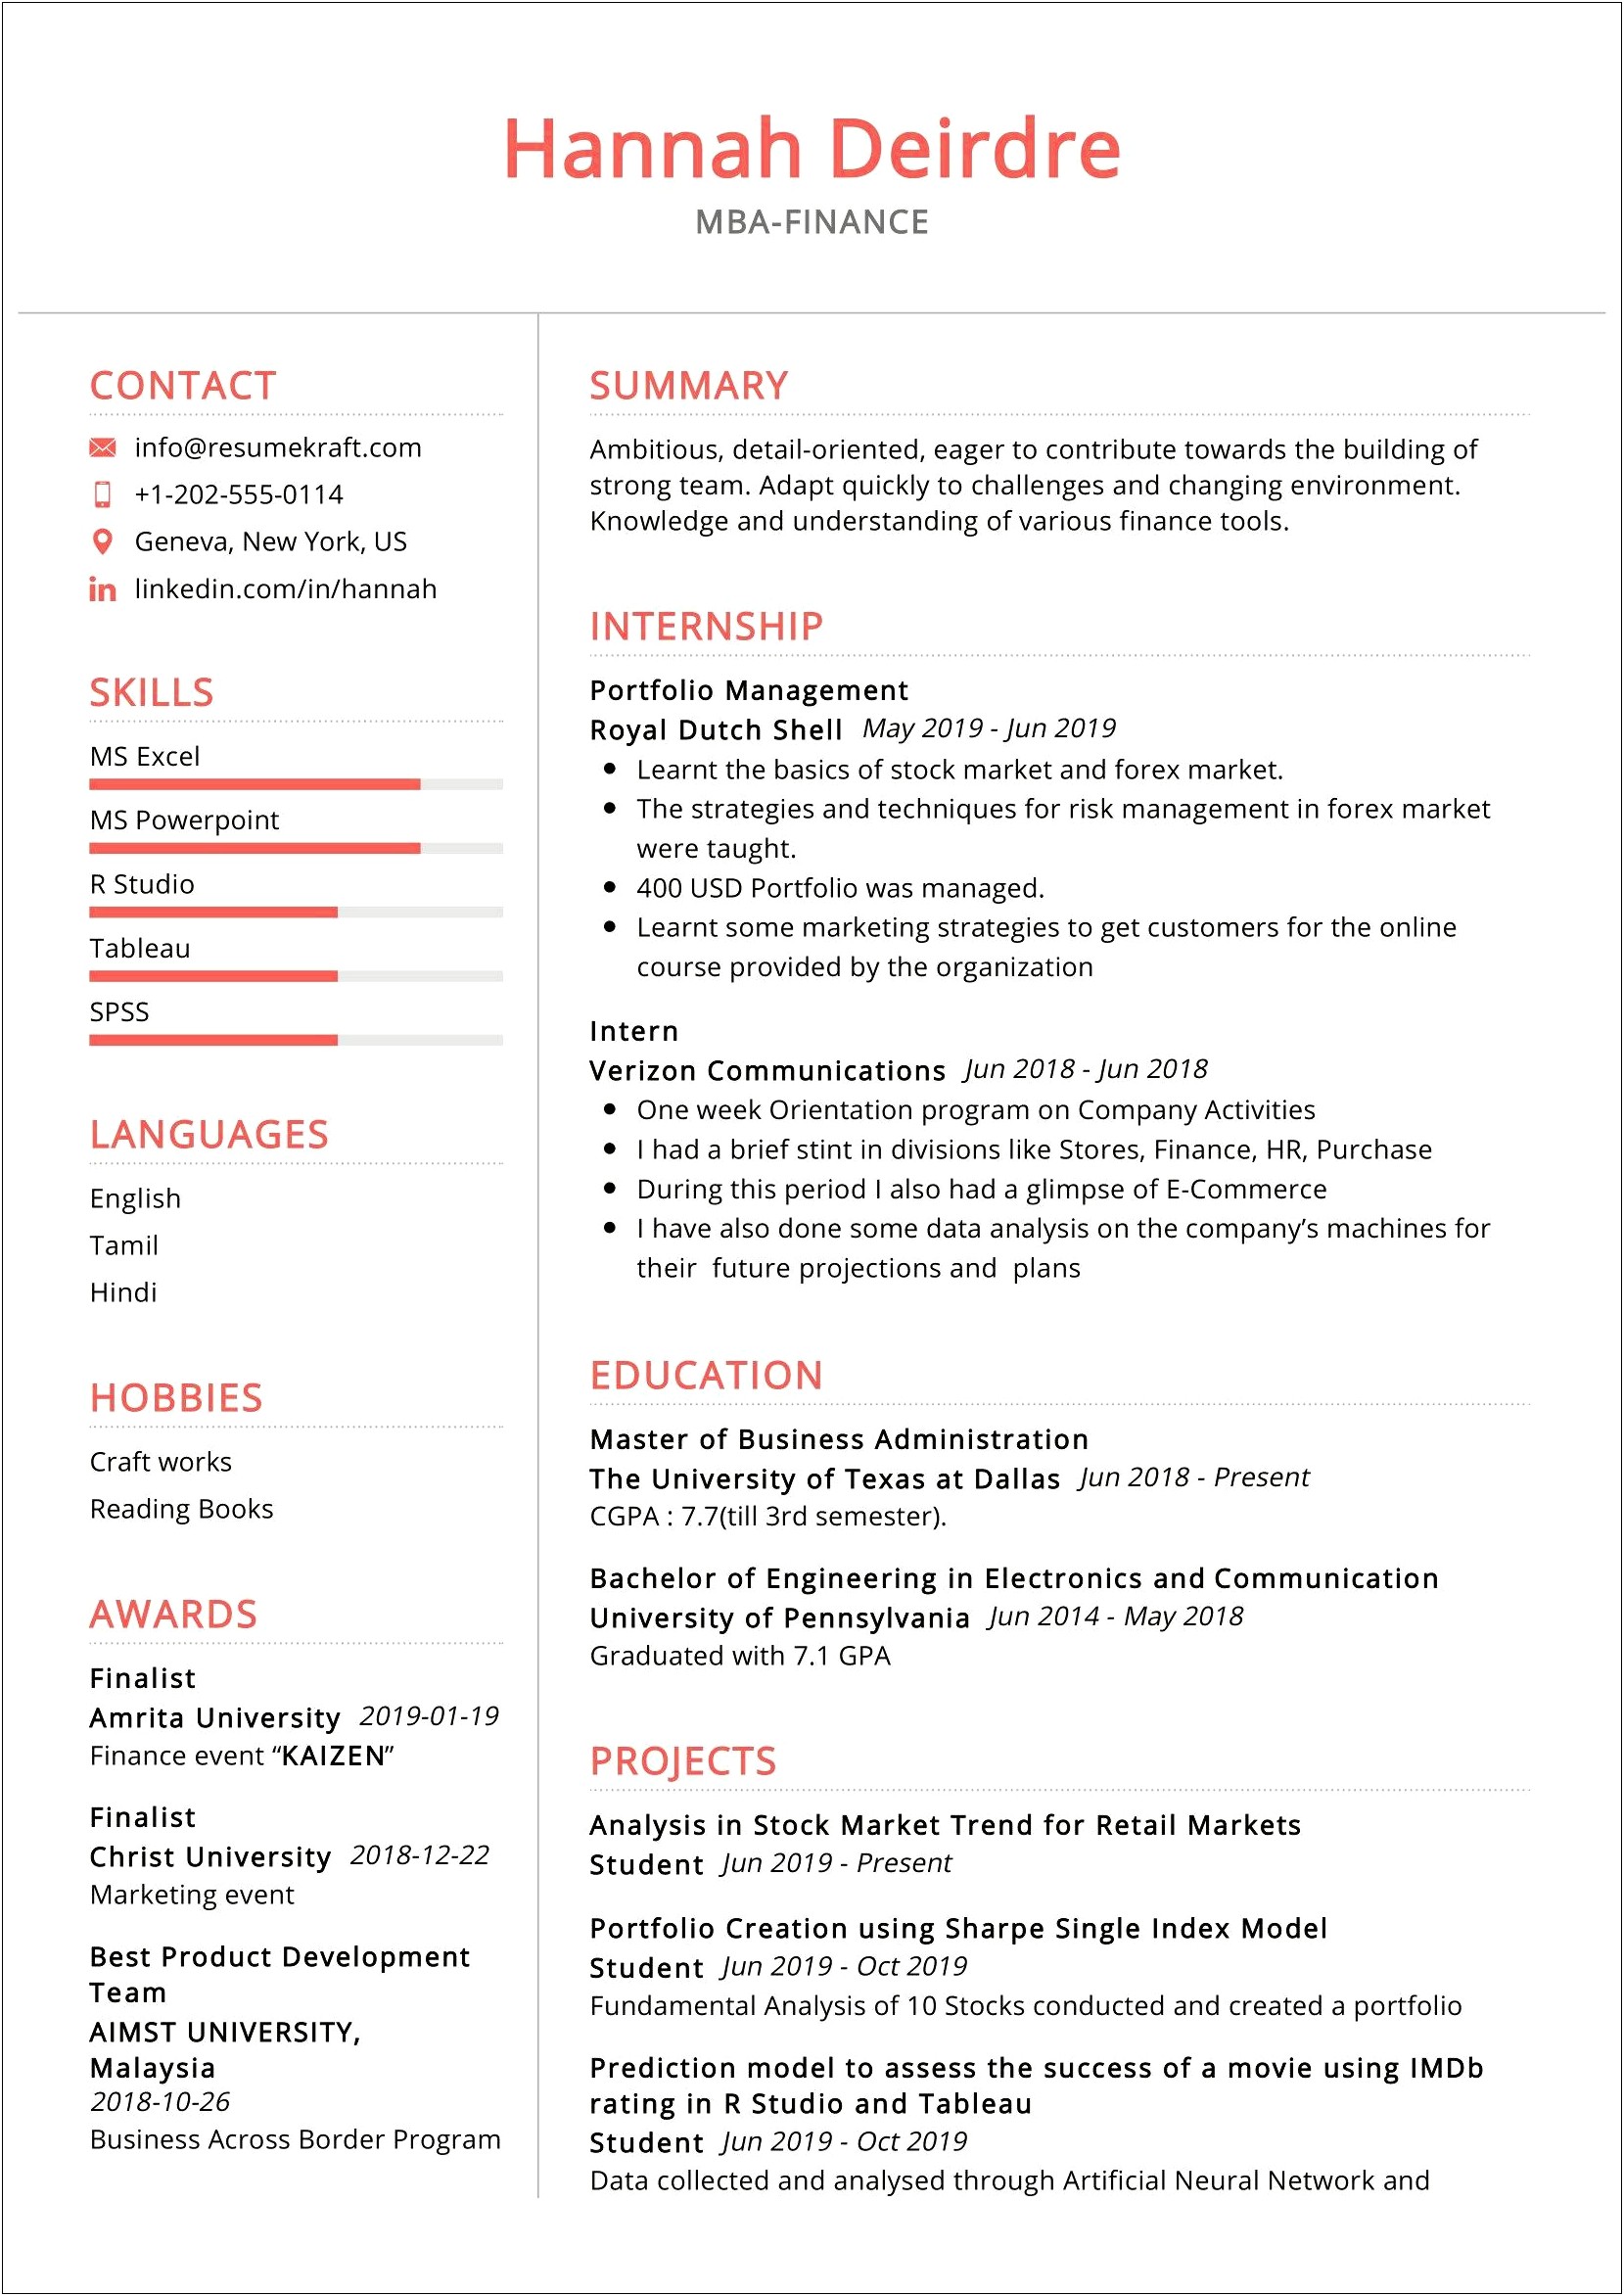 Mba Finance Experience Resume Objective